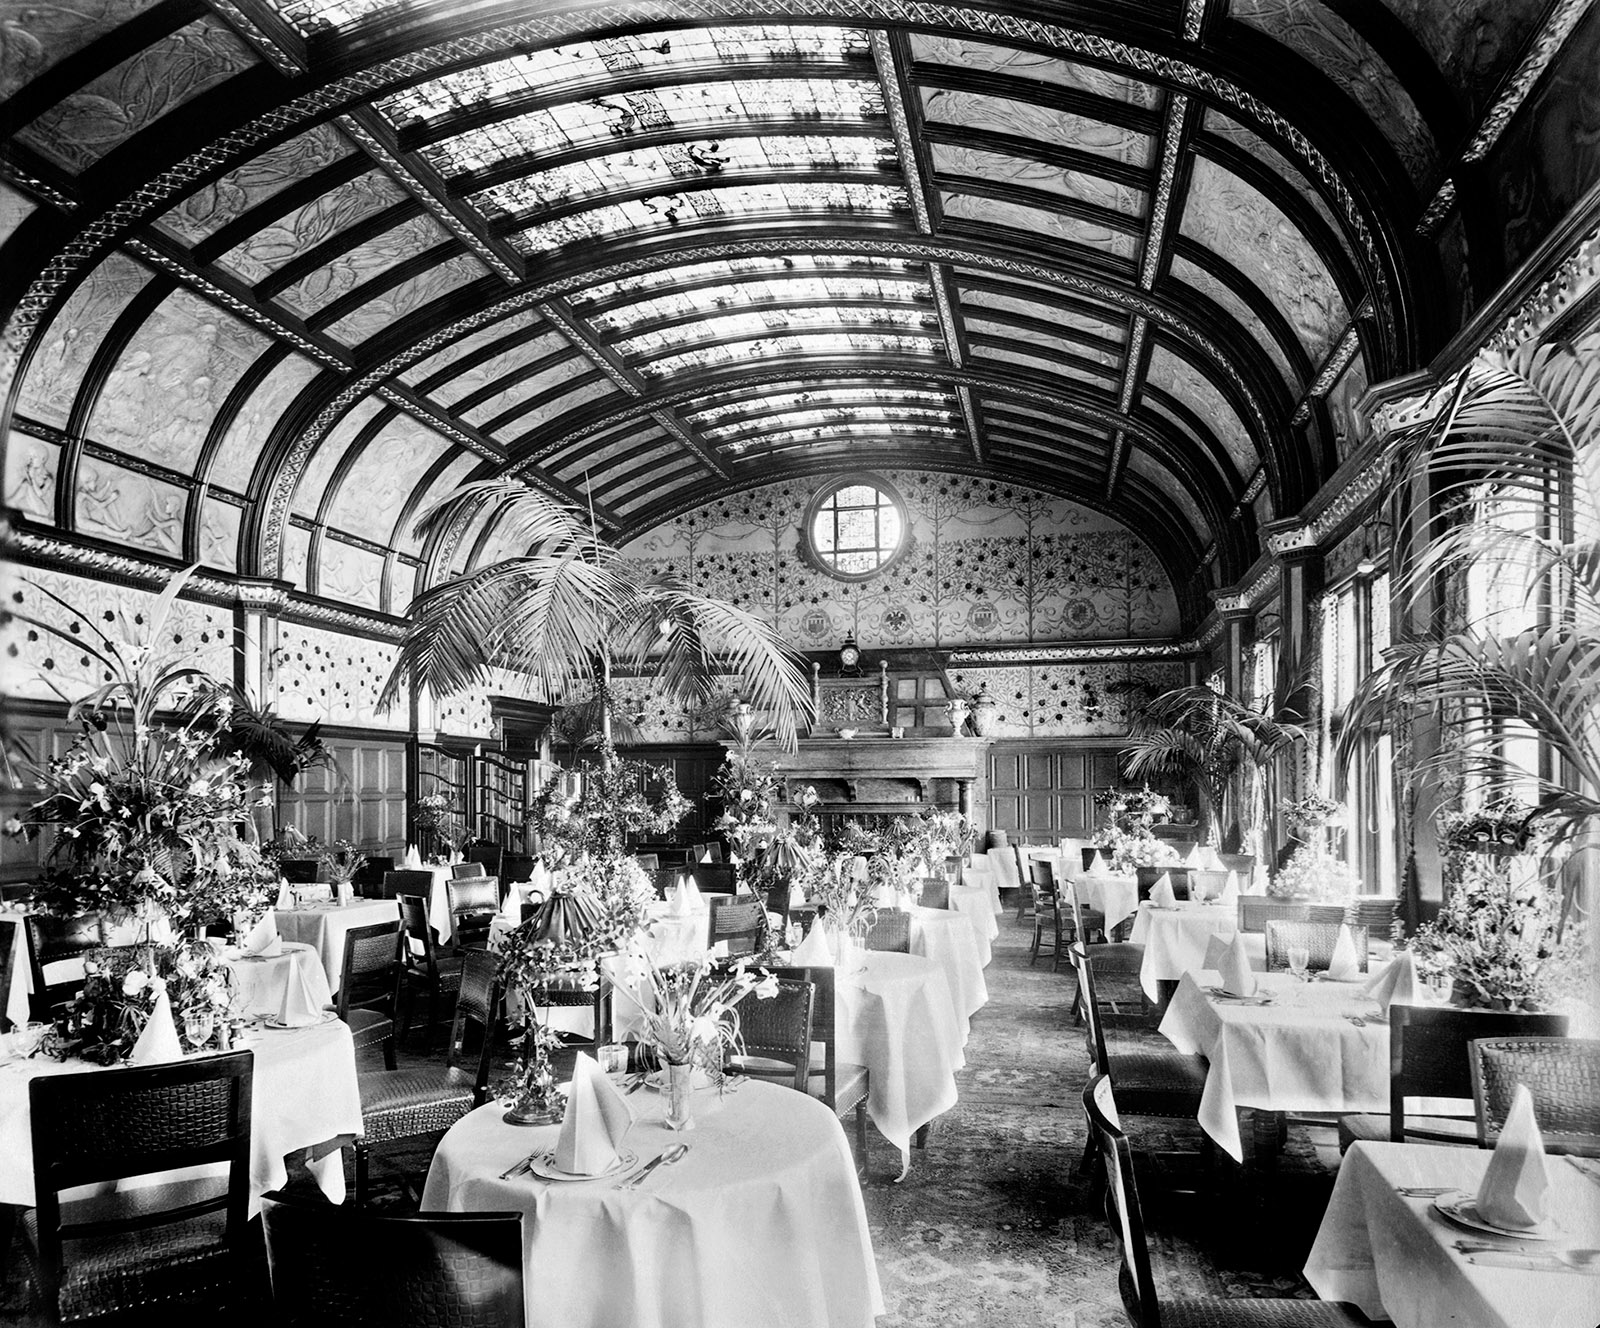 The dining room of the Savoy Hotel, London, circa 1898